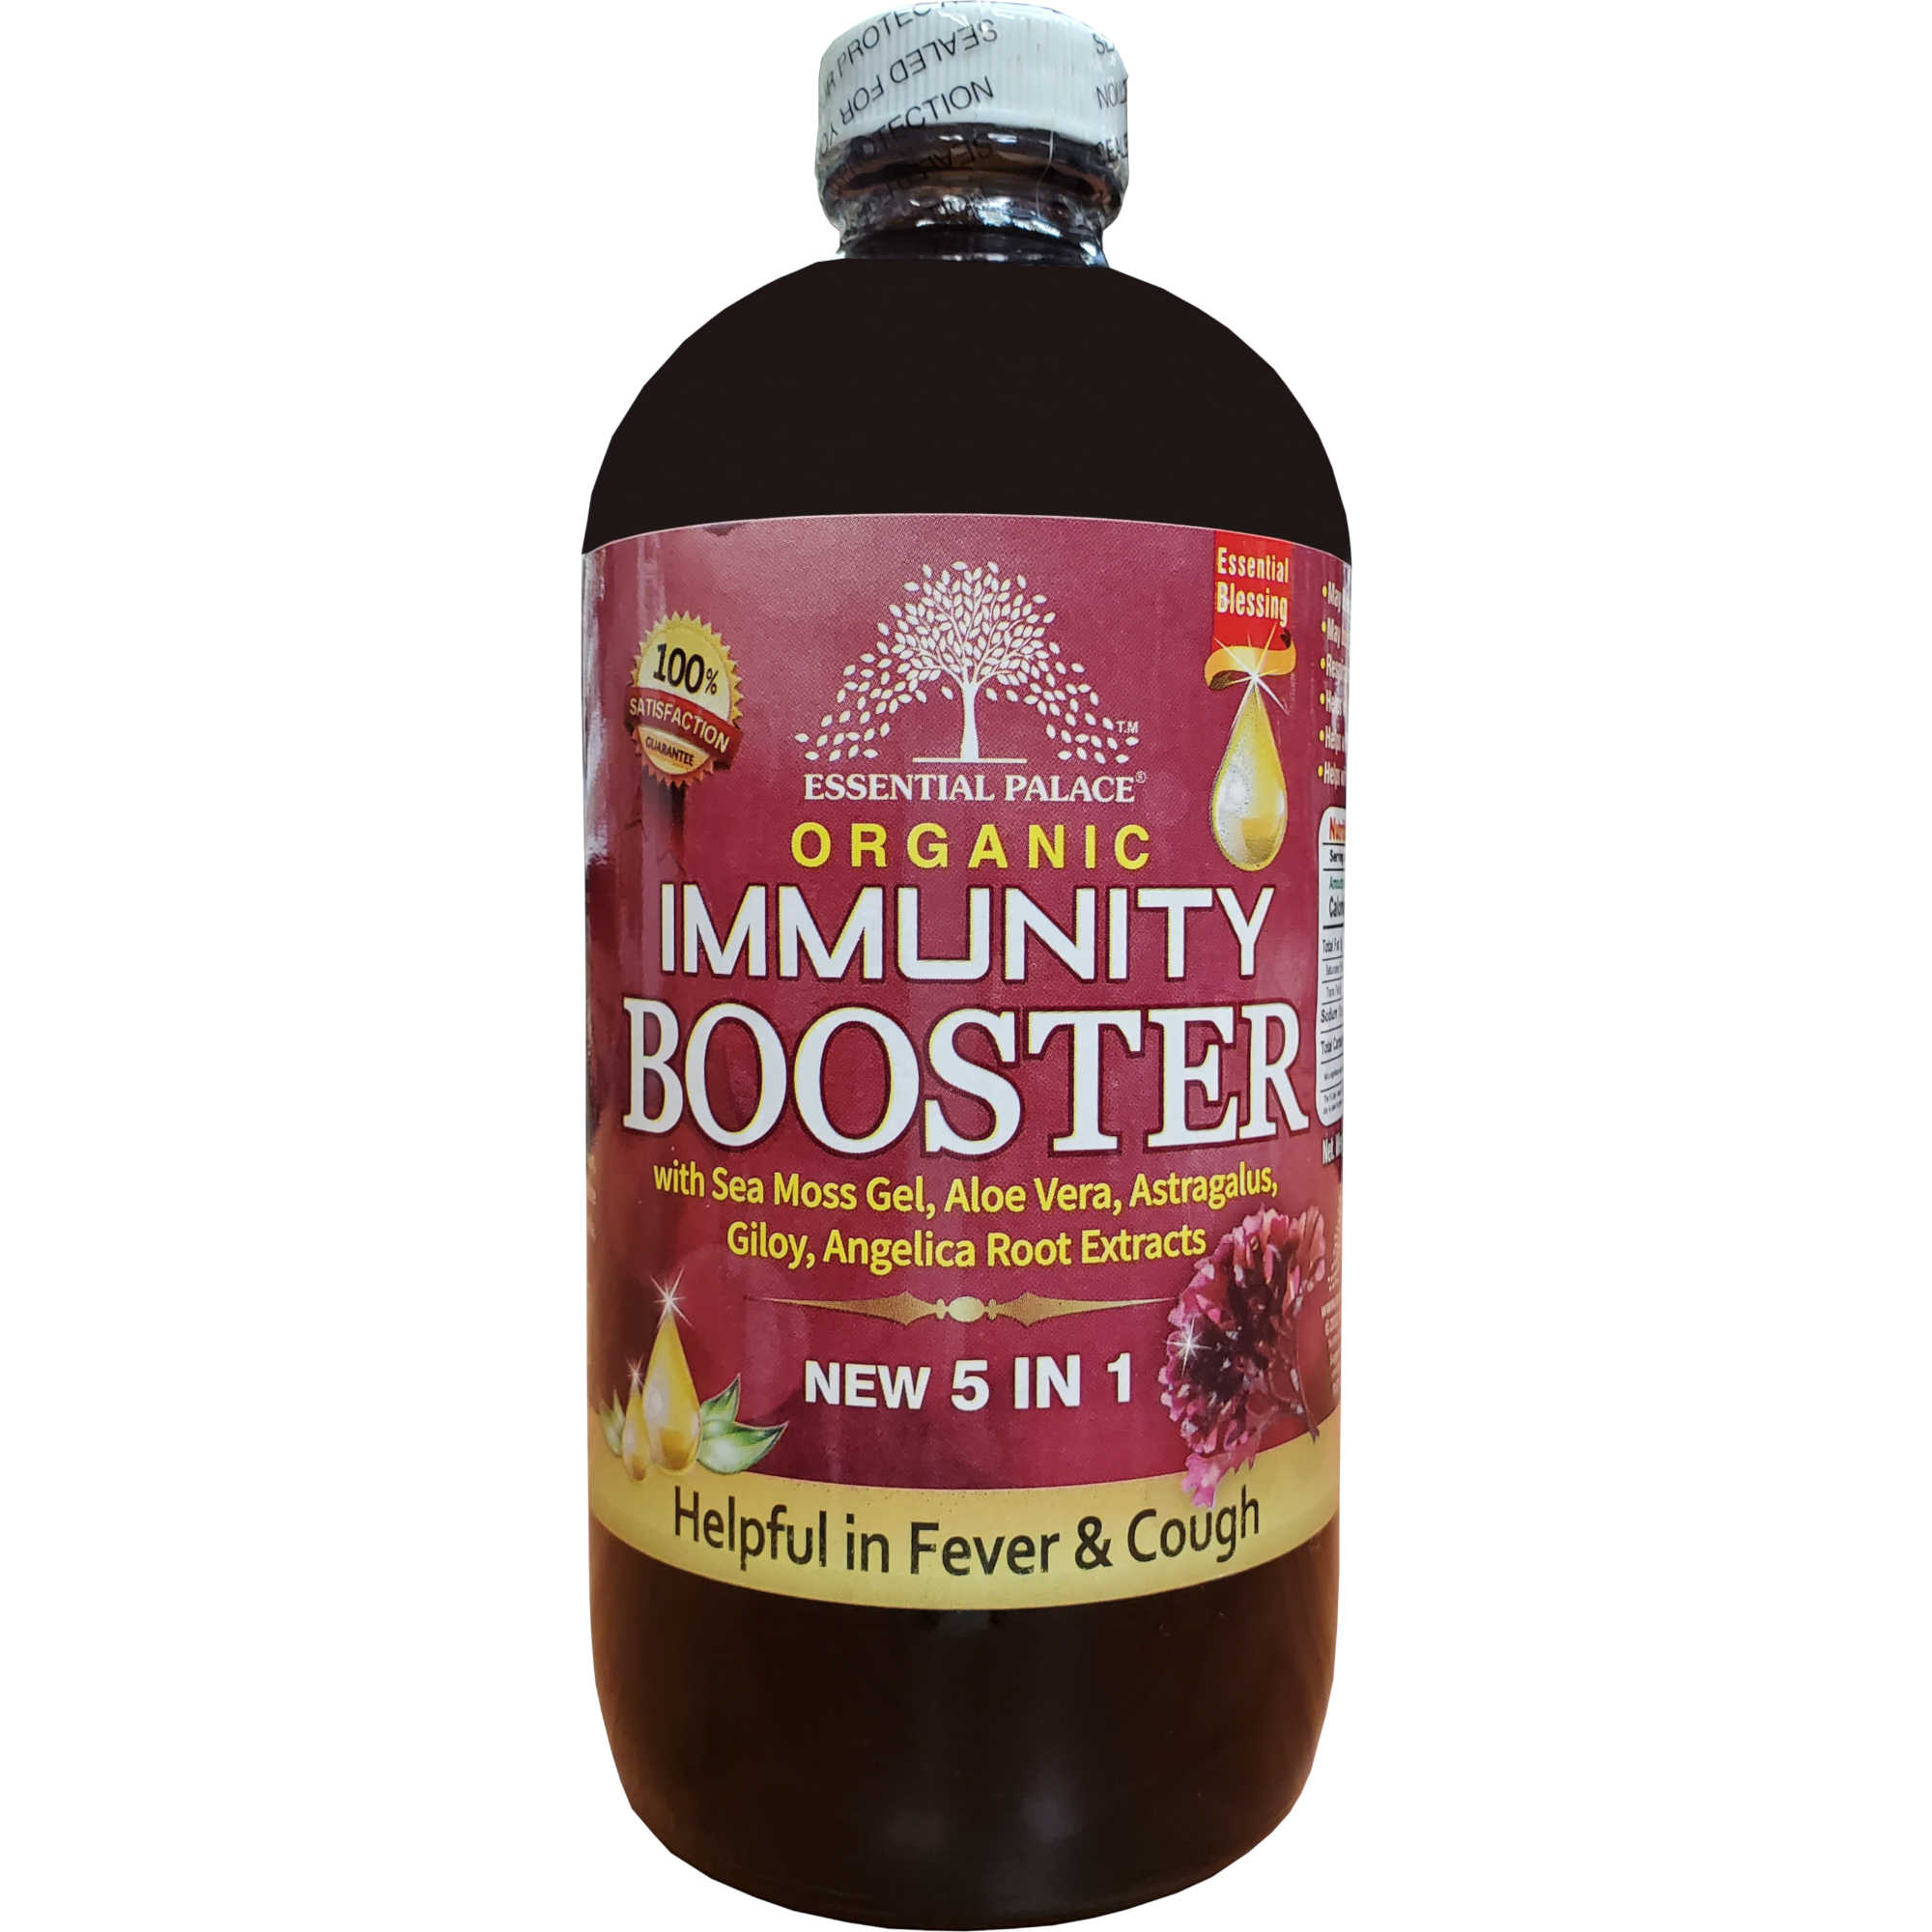 Essential Palace Organic Immunity Booster with Sea Moss Gel 5 IN 1 16 OZ front